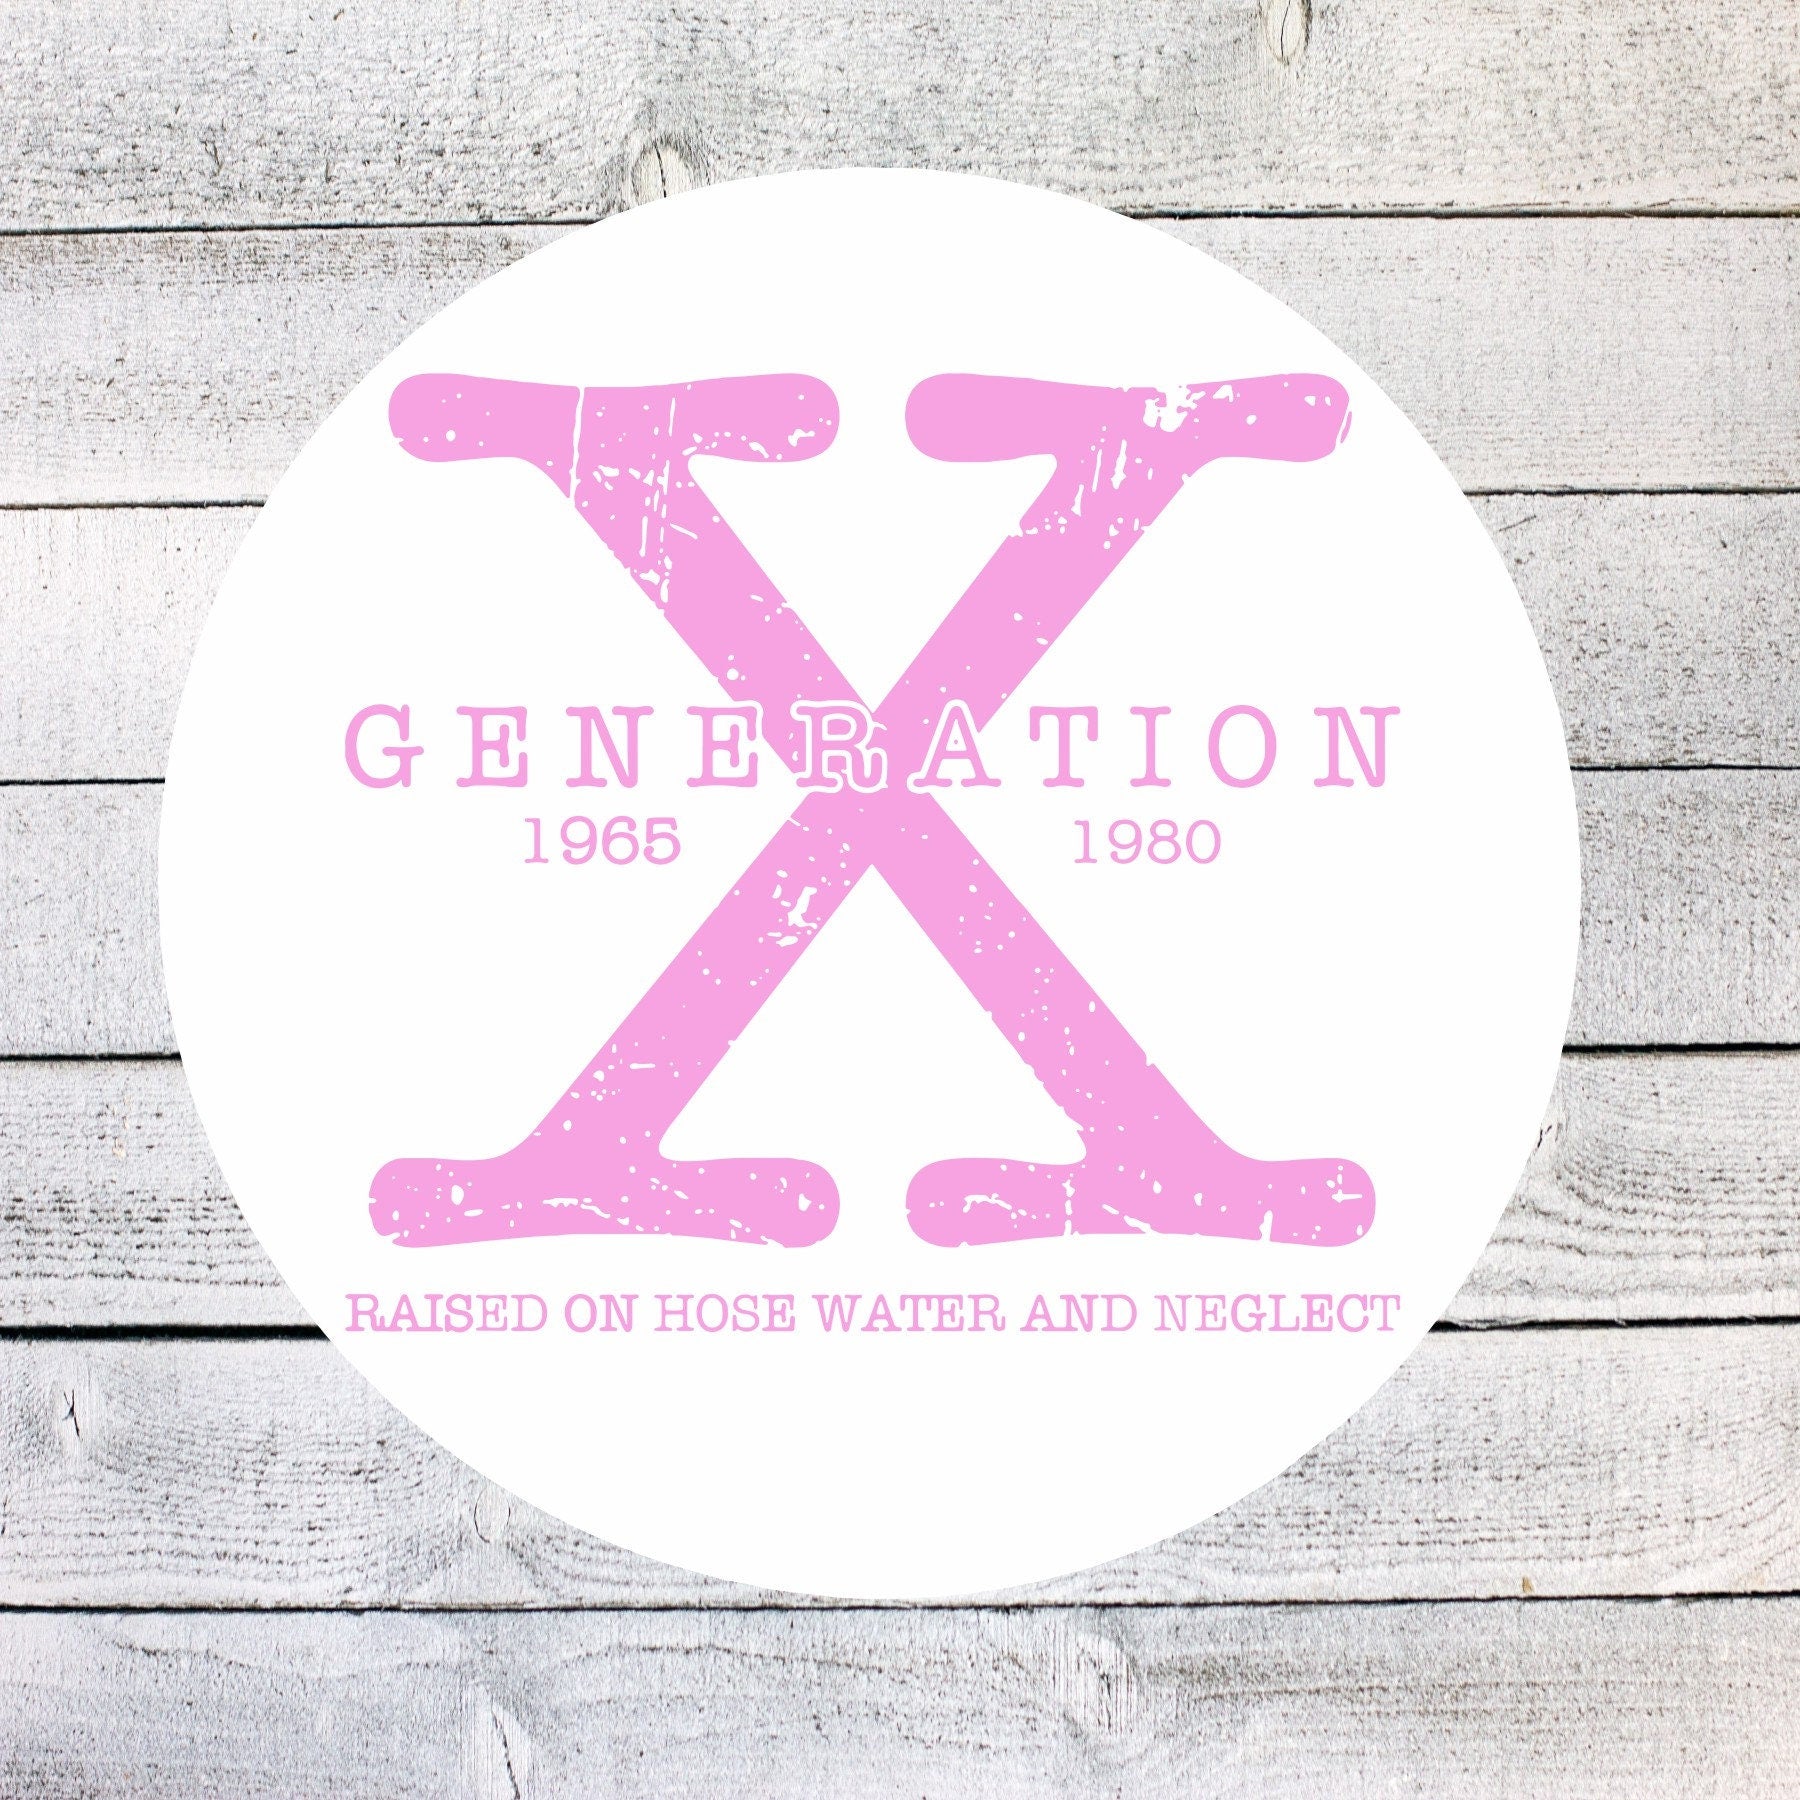 Generation X 1965-1980 Car Decal Raised on Hose Water and Neglect Sticker Funny Gen X Sticker